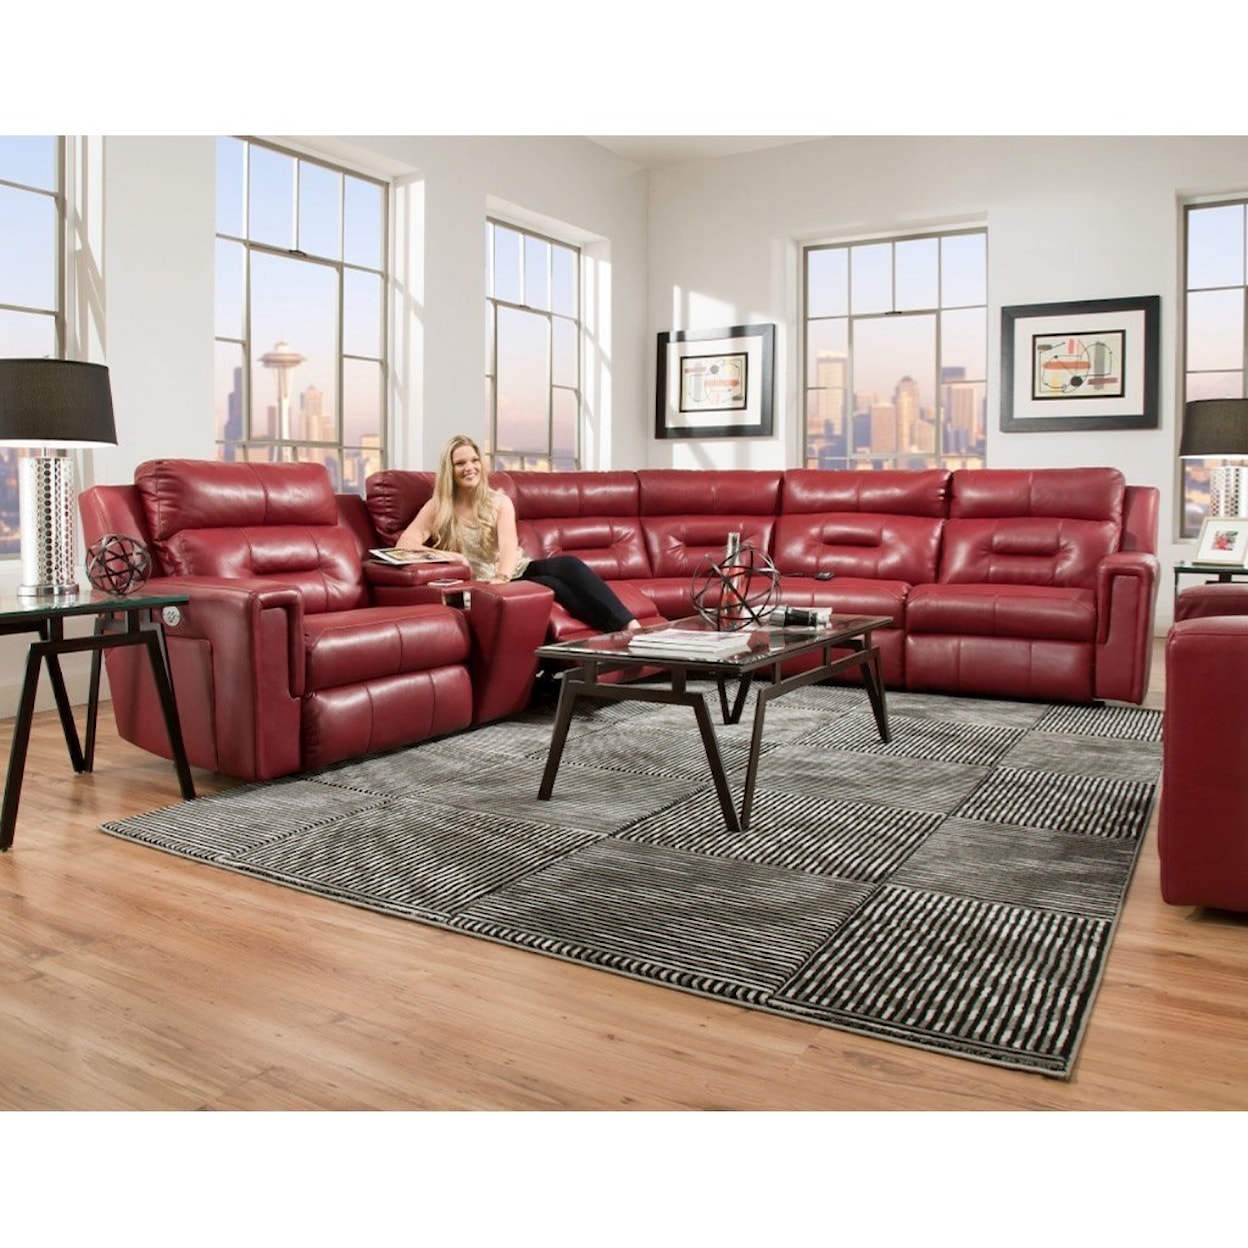 Design2Recline Excel Pwr Headrest Reclining Sectional w/ 5 Seats